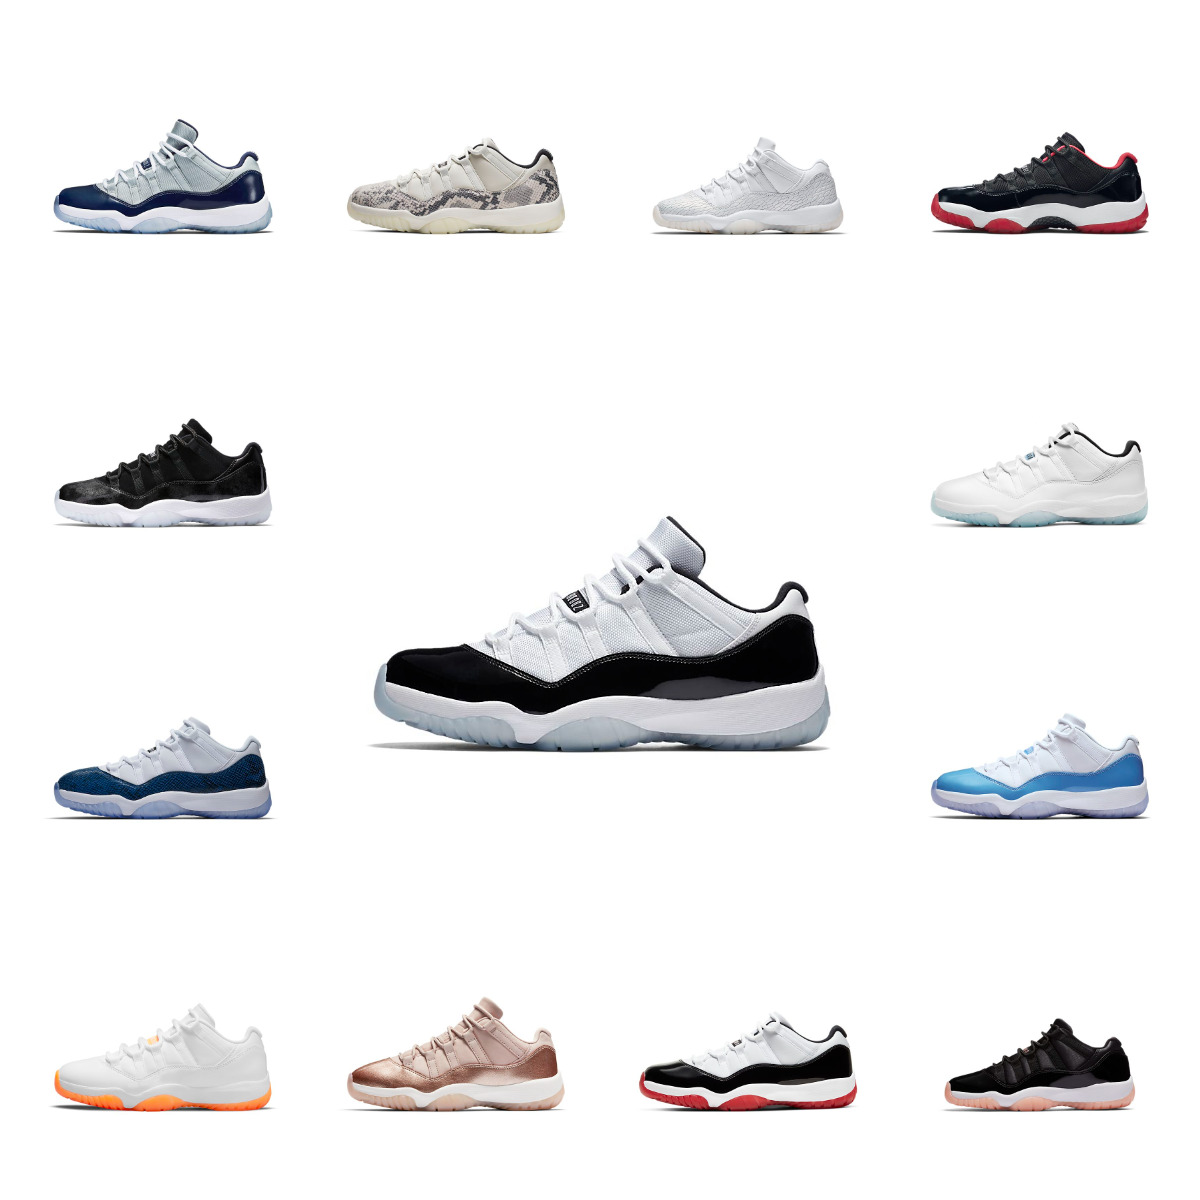 

Jumpman 11 Basketball Shoes Men Women 11s Cherry Midnight Navy Cool Grey 25th Anniversary 72-10 Low Bred Pure Violet Mens Trainers Sport Sneakers 36-47, Color 10